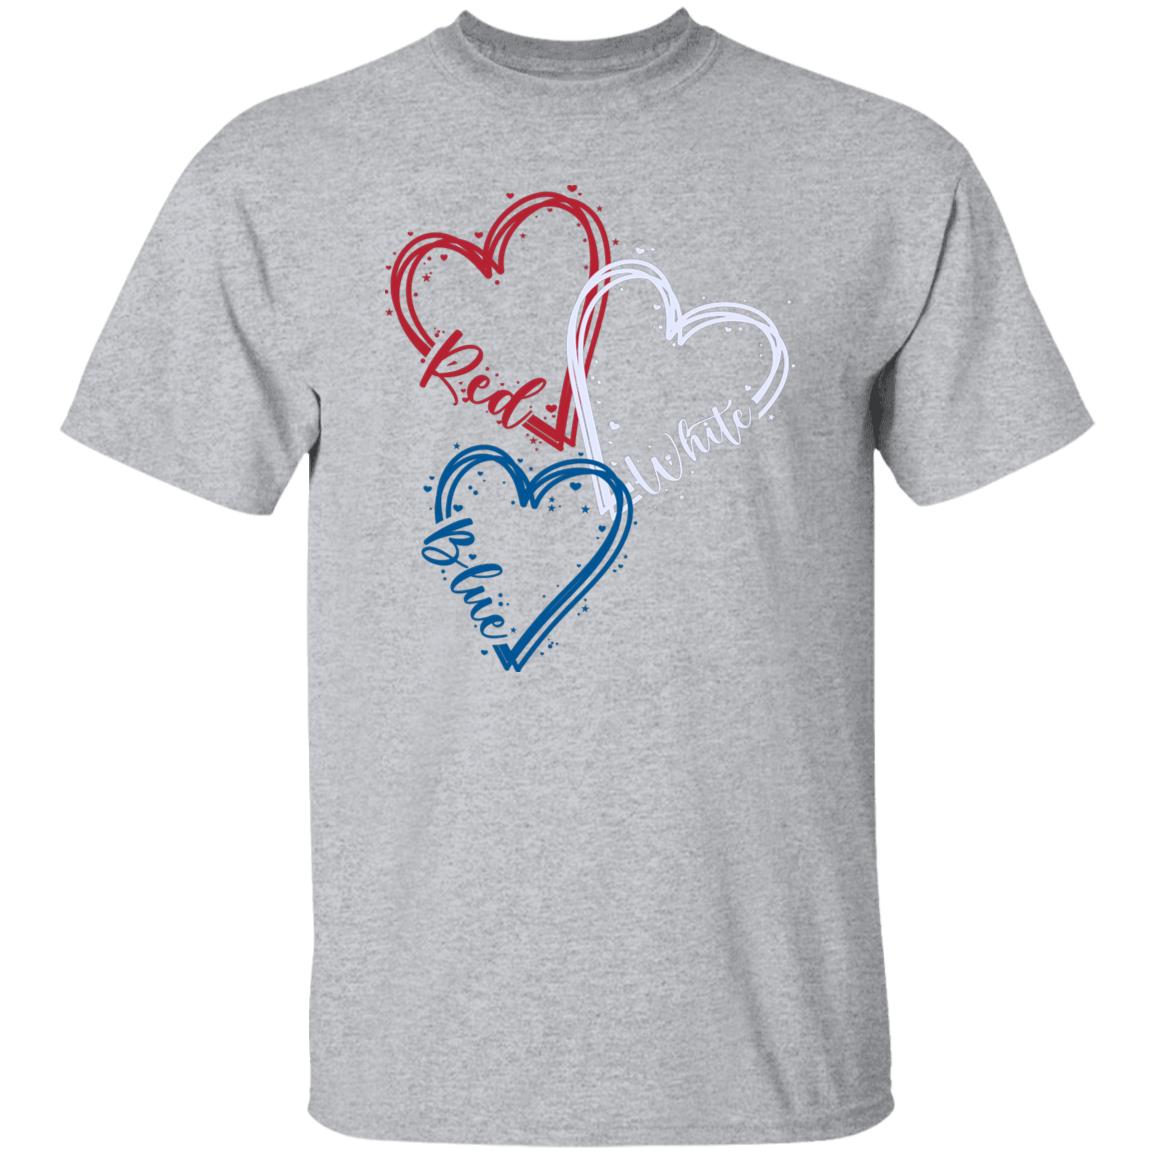 Red White and Blue Heart Design with Confetti | Patriotic Cutout Artwork Unisex T-shirt